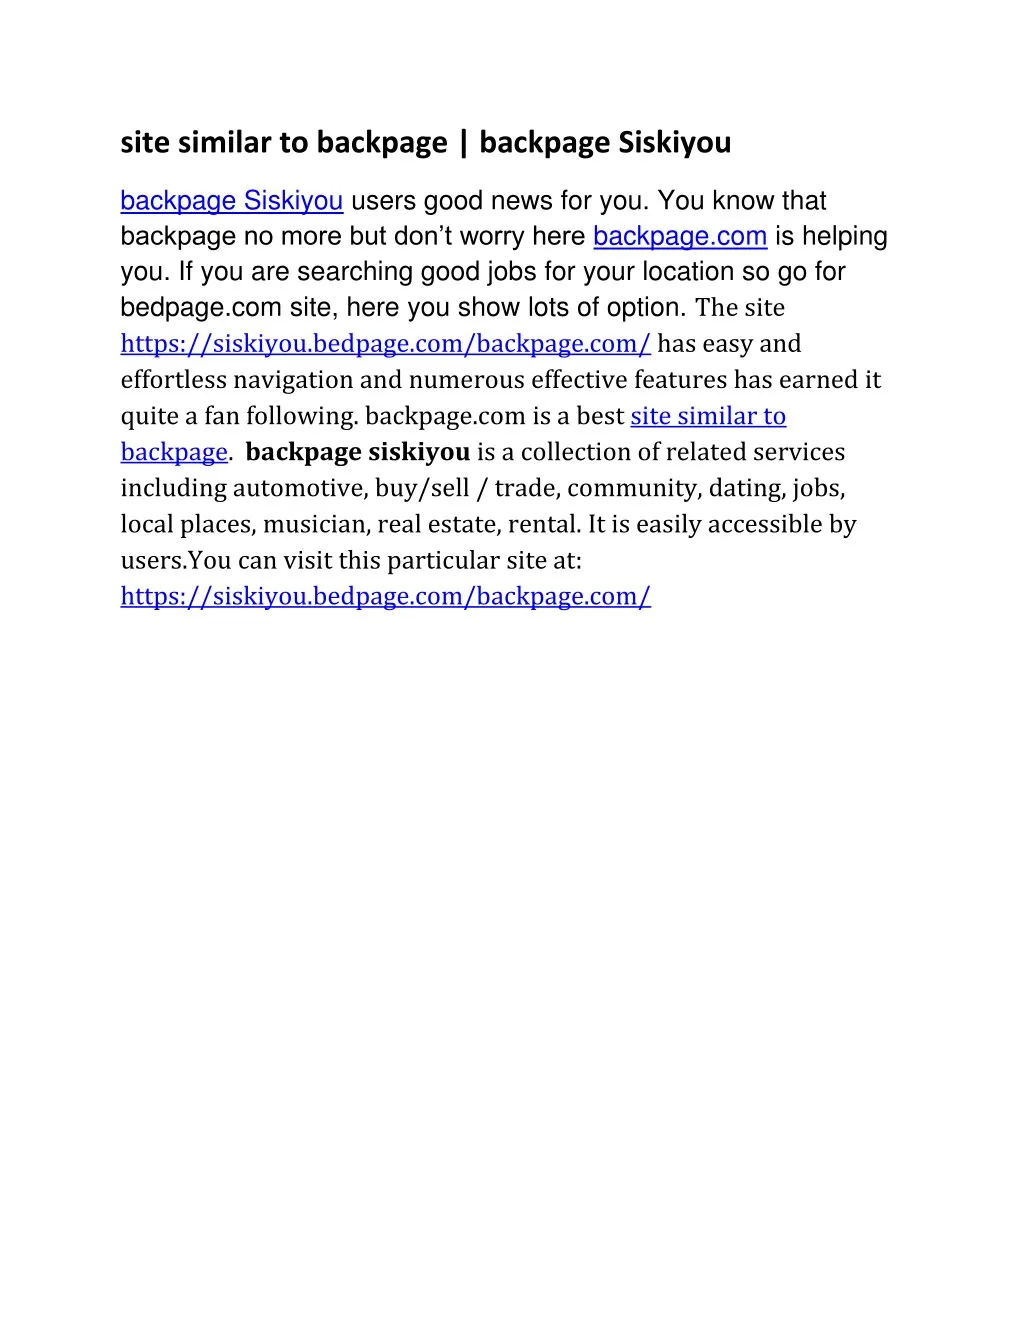 site similar to backpage backpage siskiyou